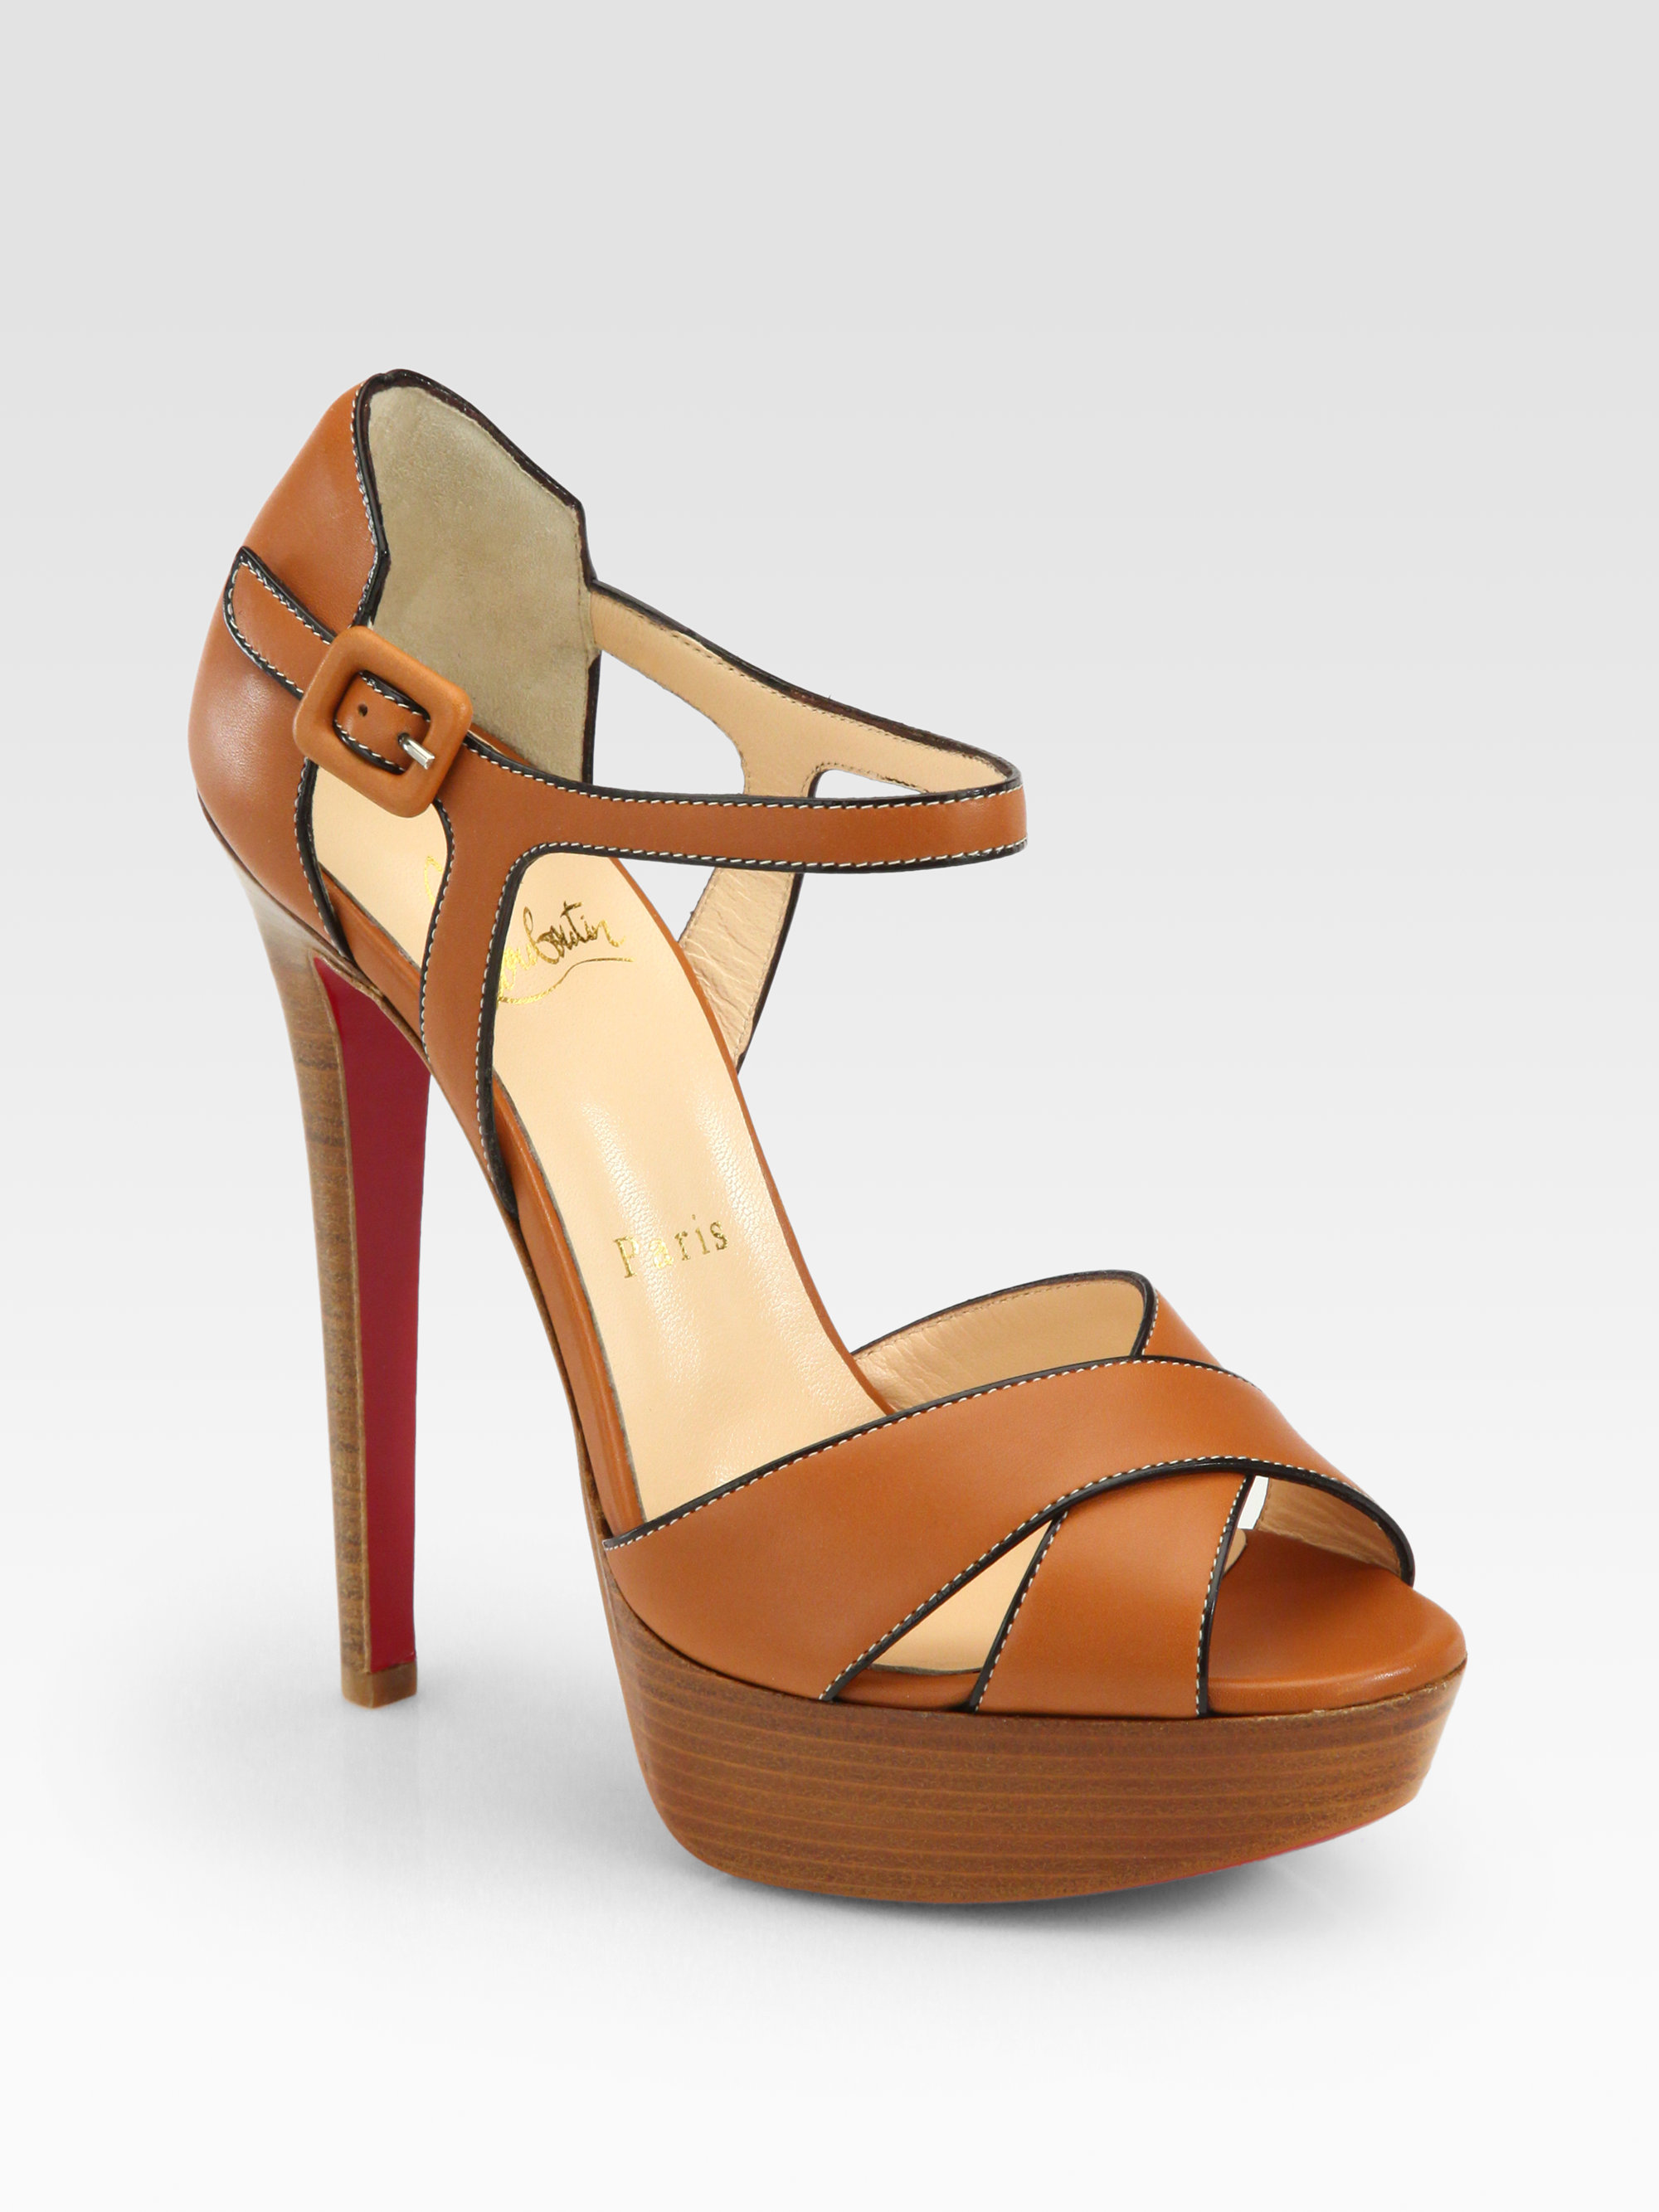 Christian Louboutin Sporting Leather Platform Sandals in Brown | Lyst